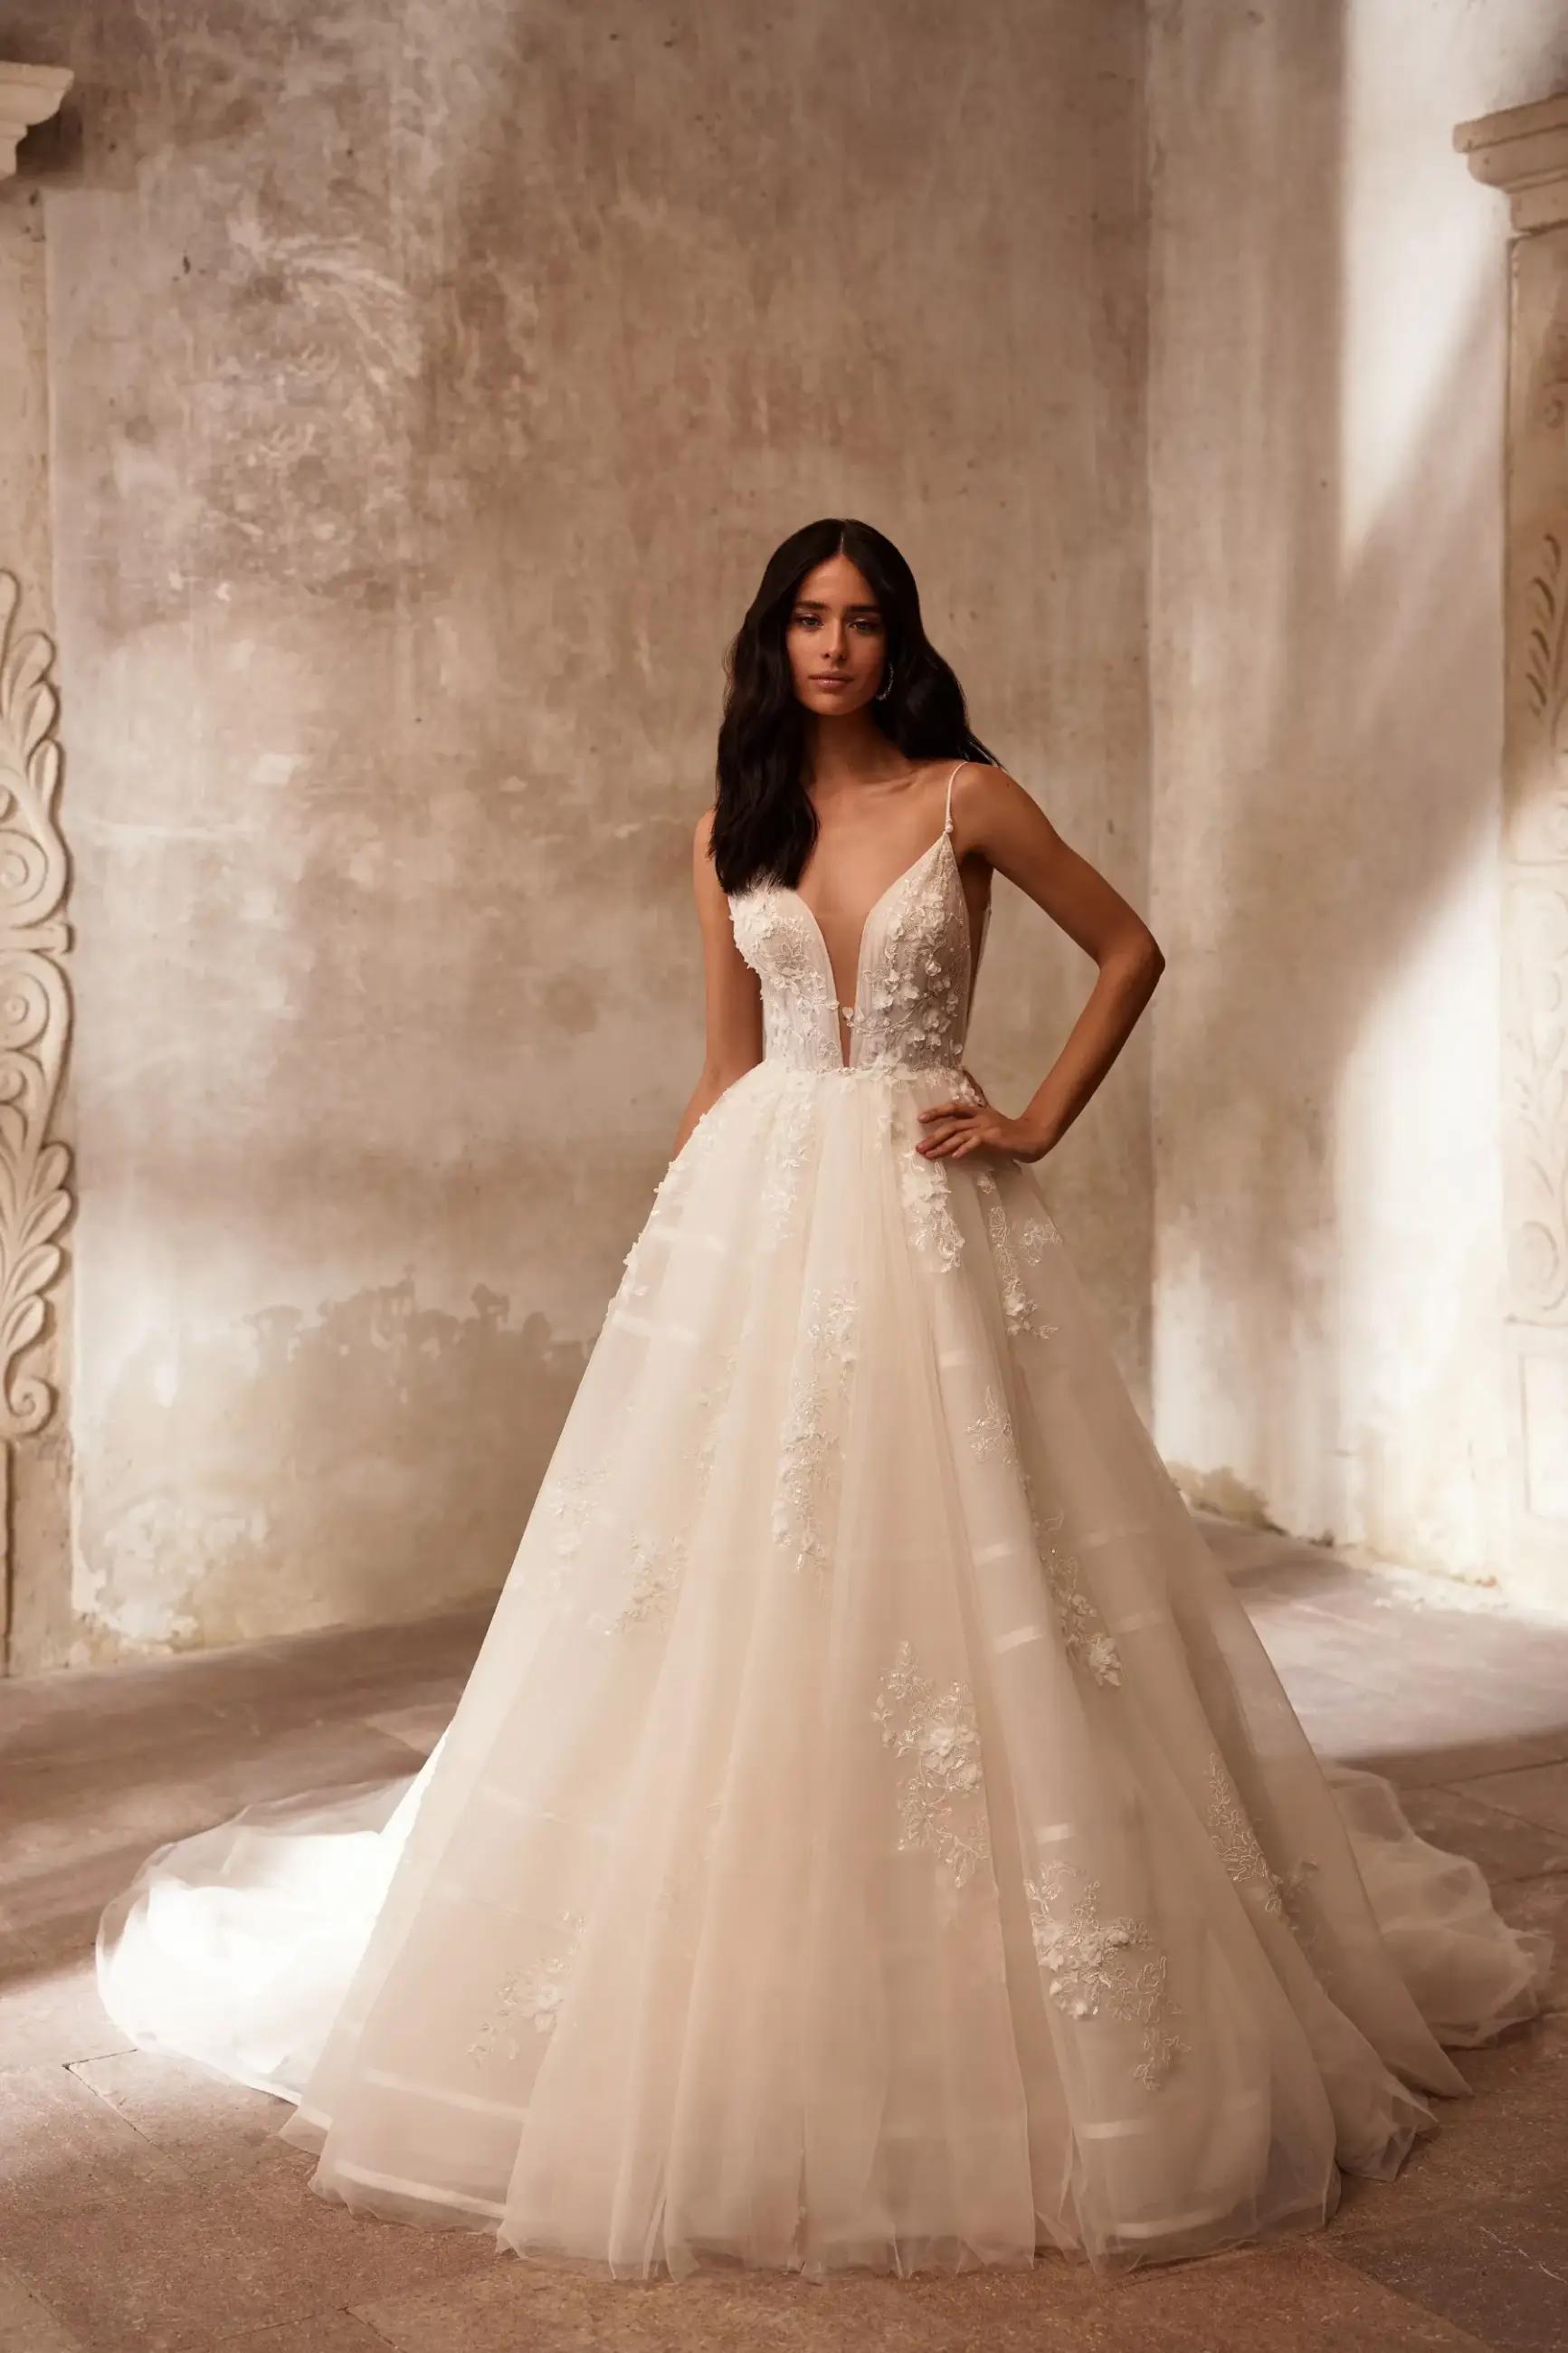 Wedding Gown Trends: Sleeves, Straps, or Strapless? Image